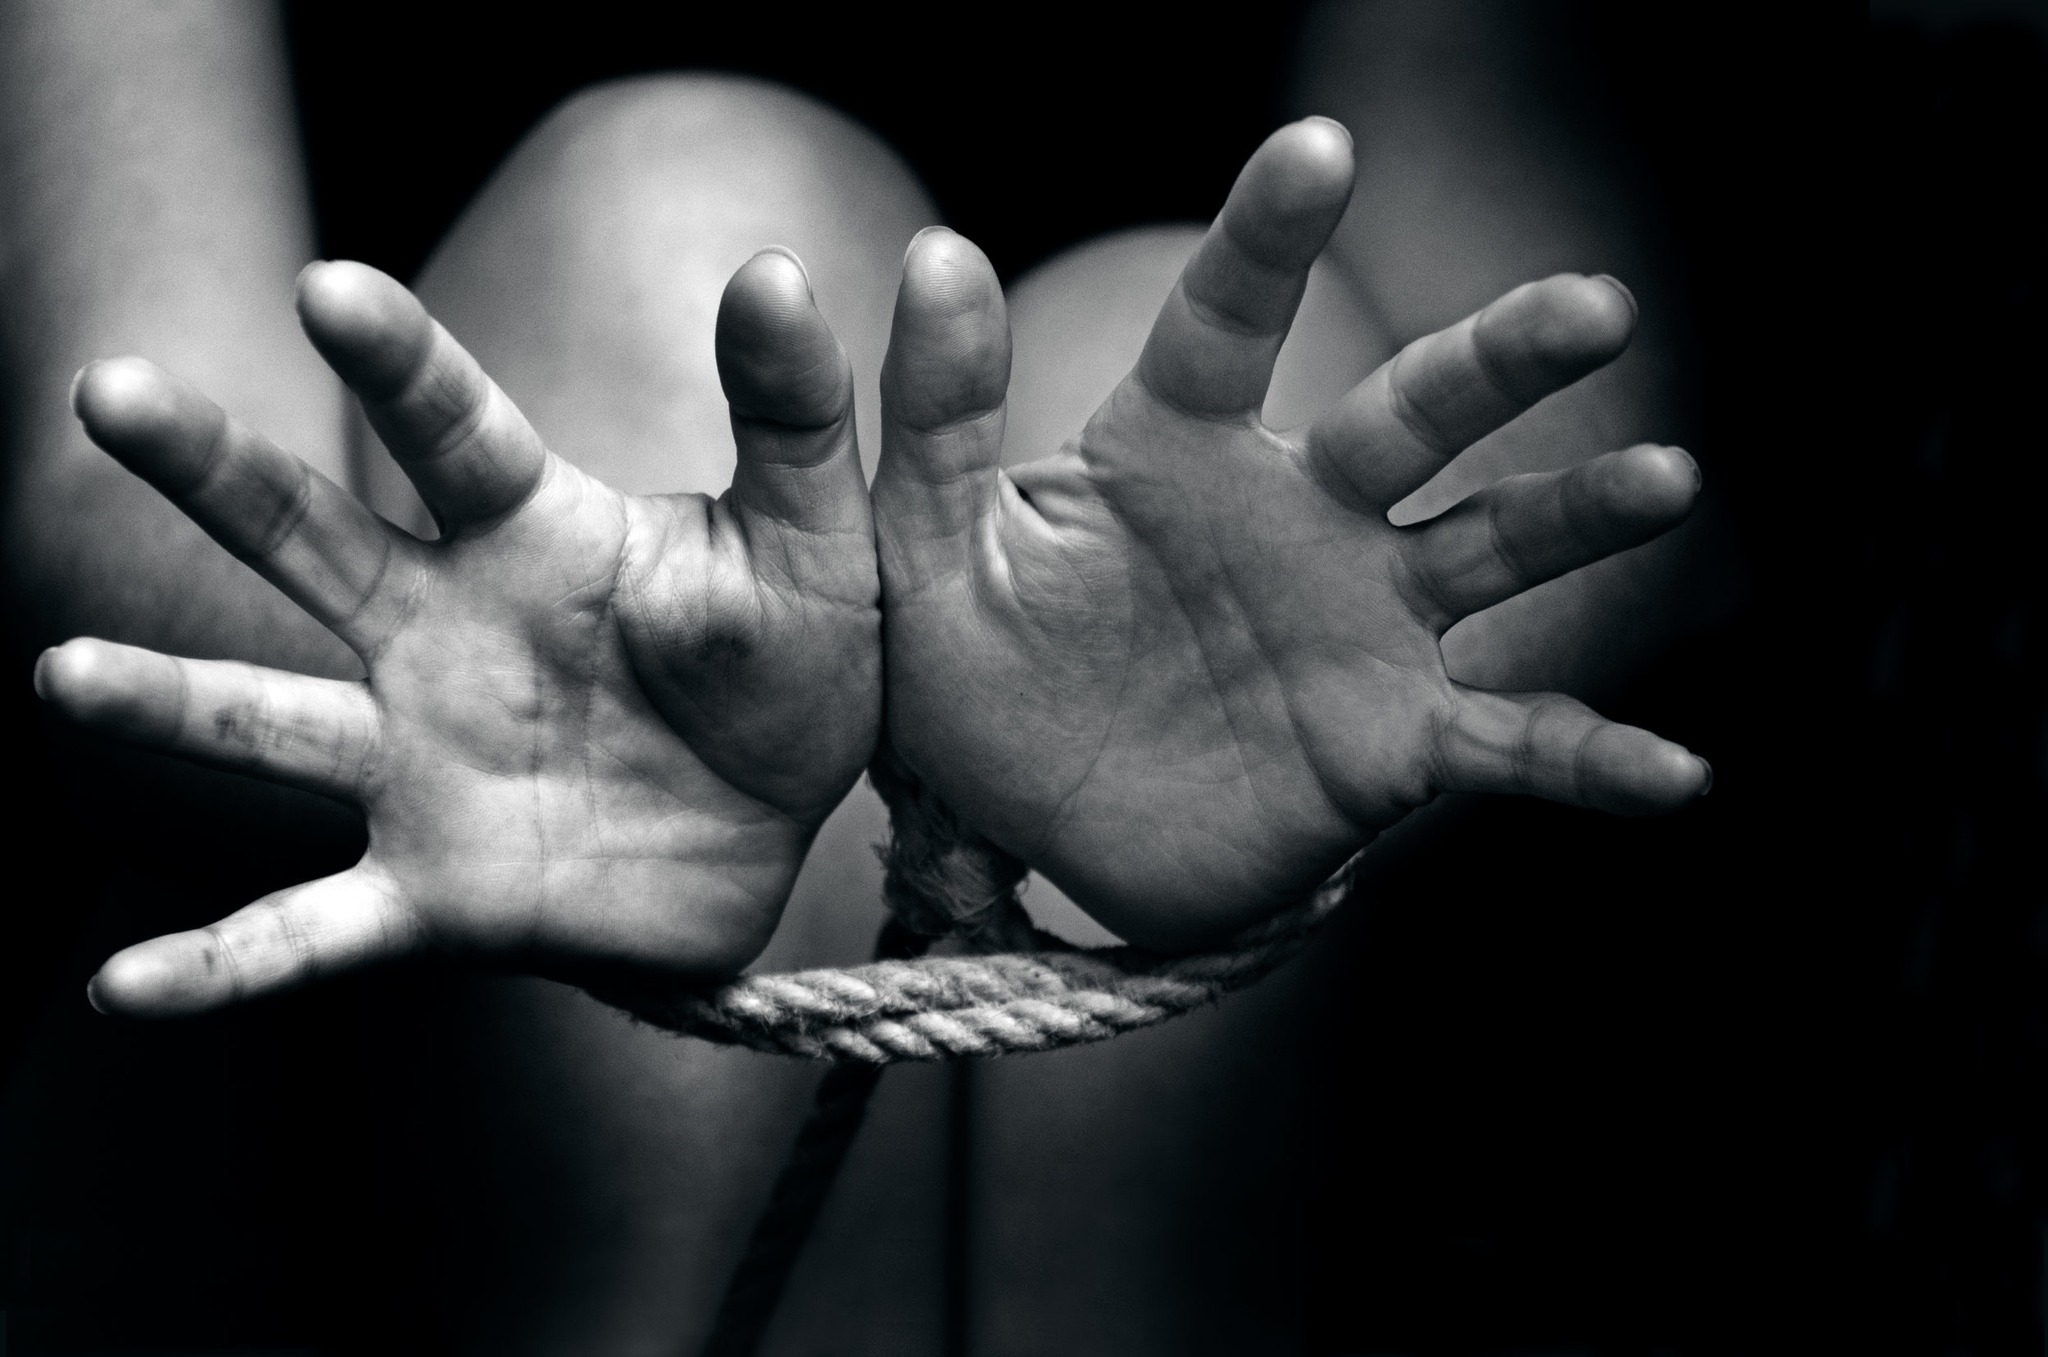 Three suspects arrested for trafficking in persons, three victims rescued